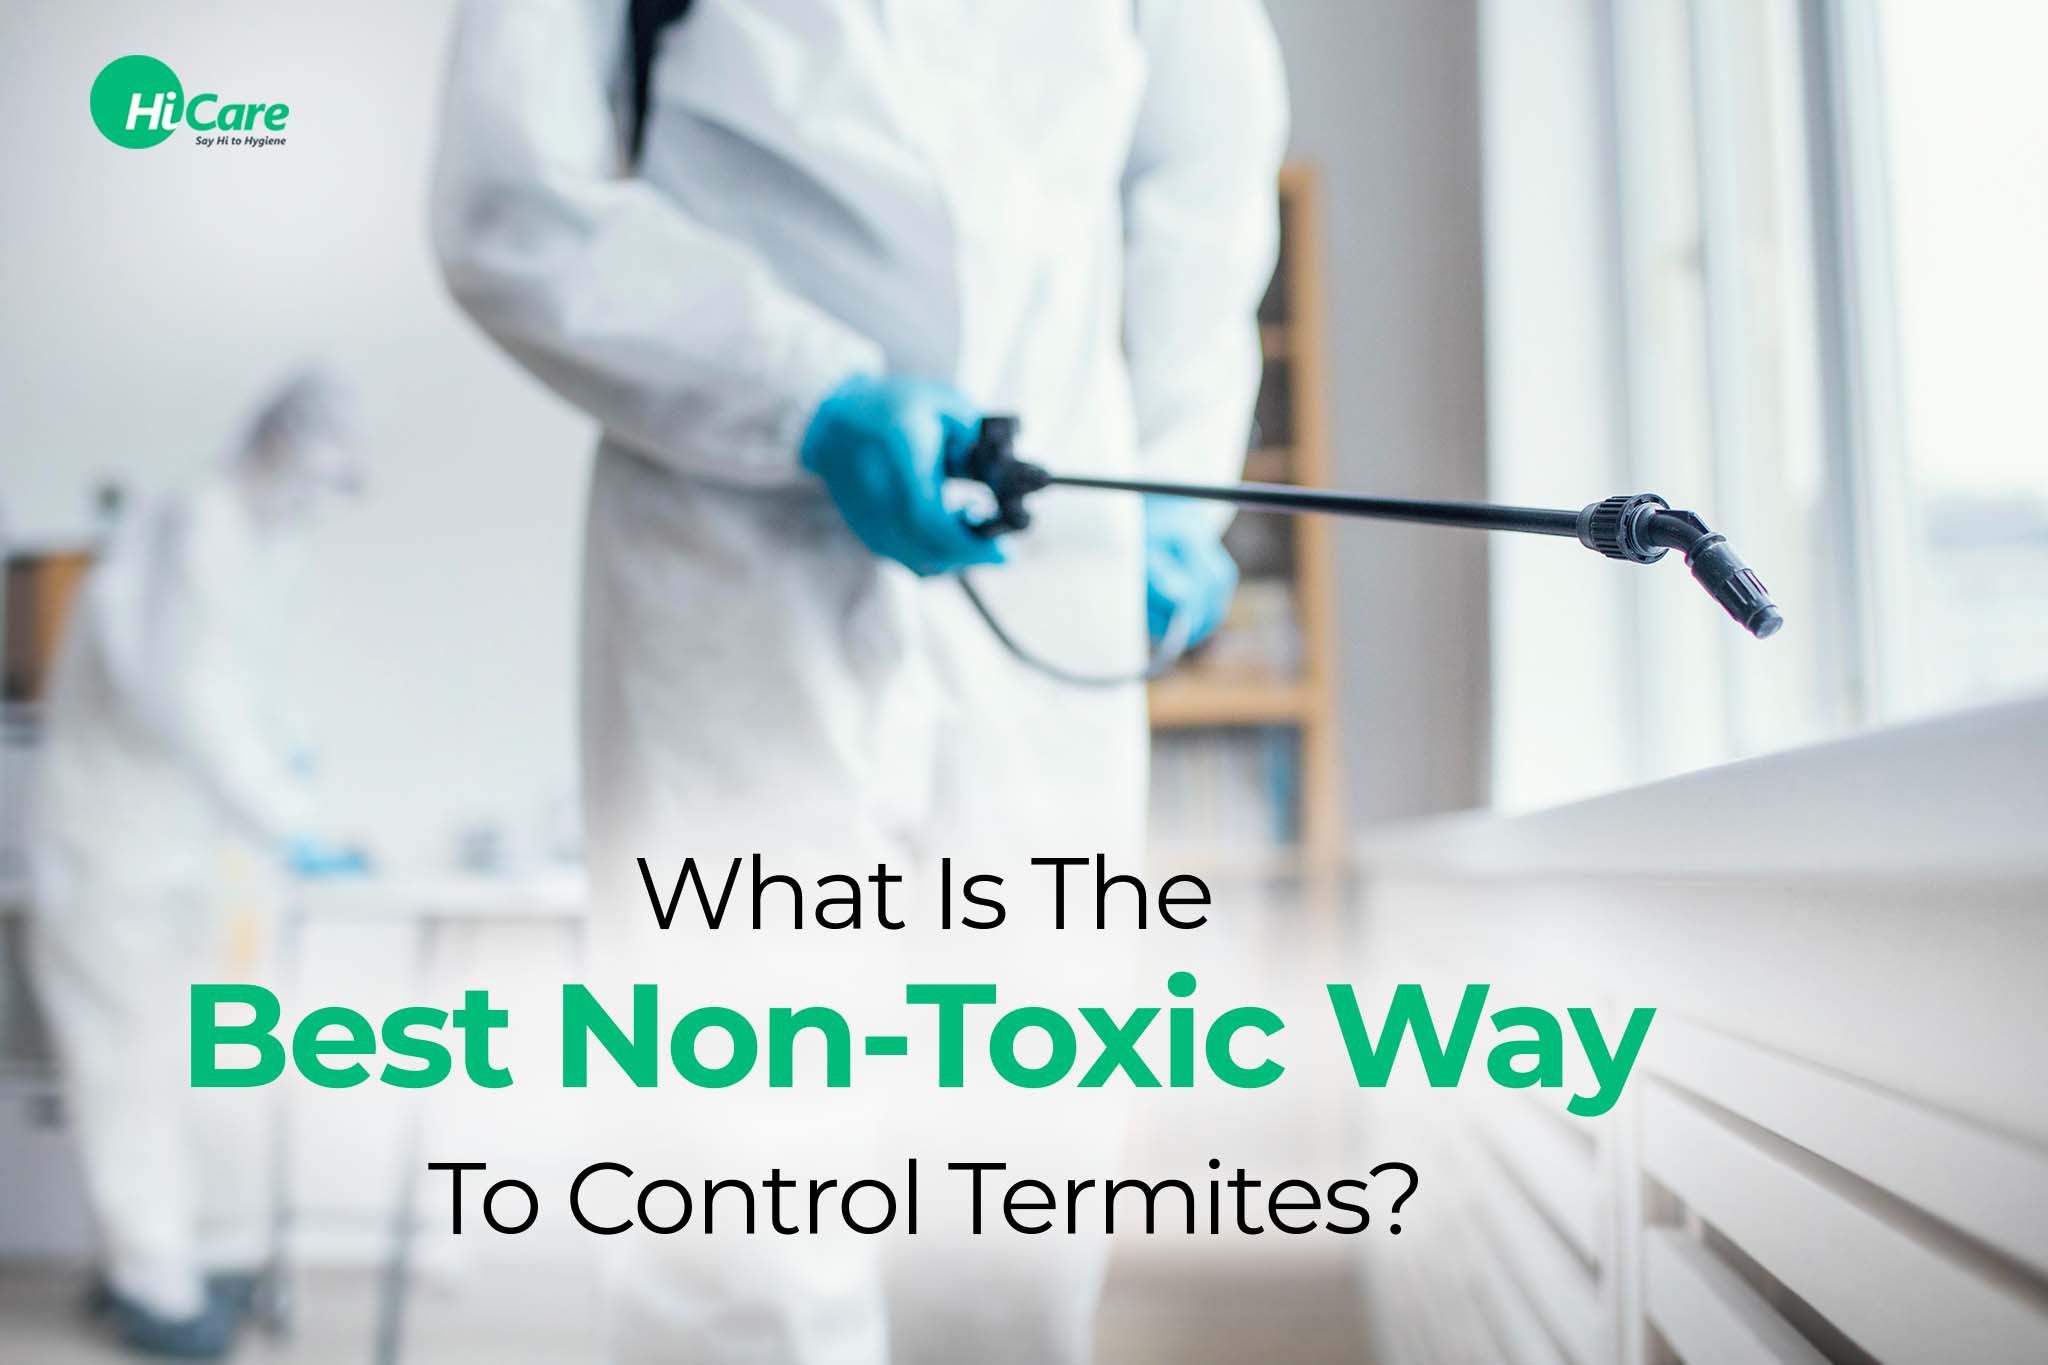 what is the best non-toxic way to control termites